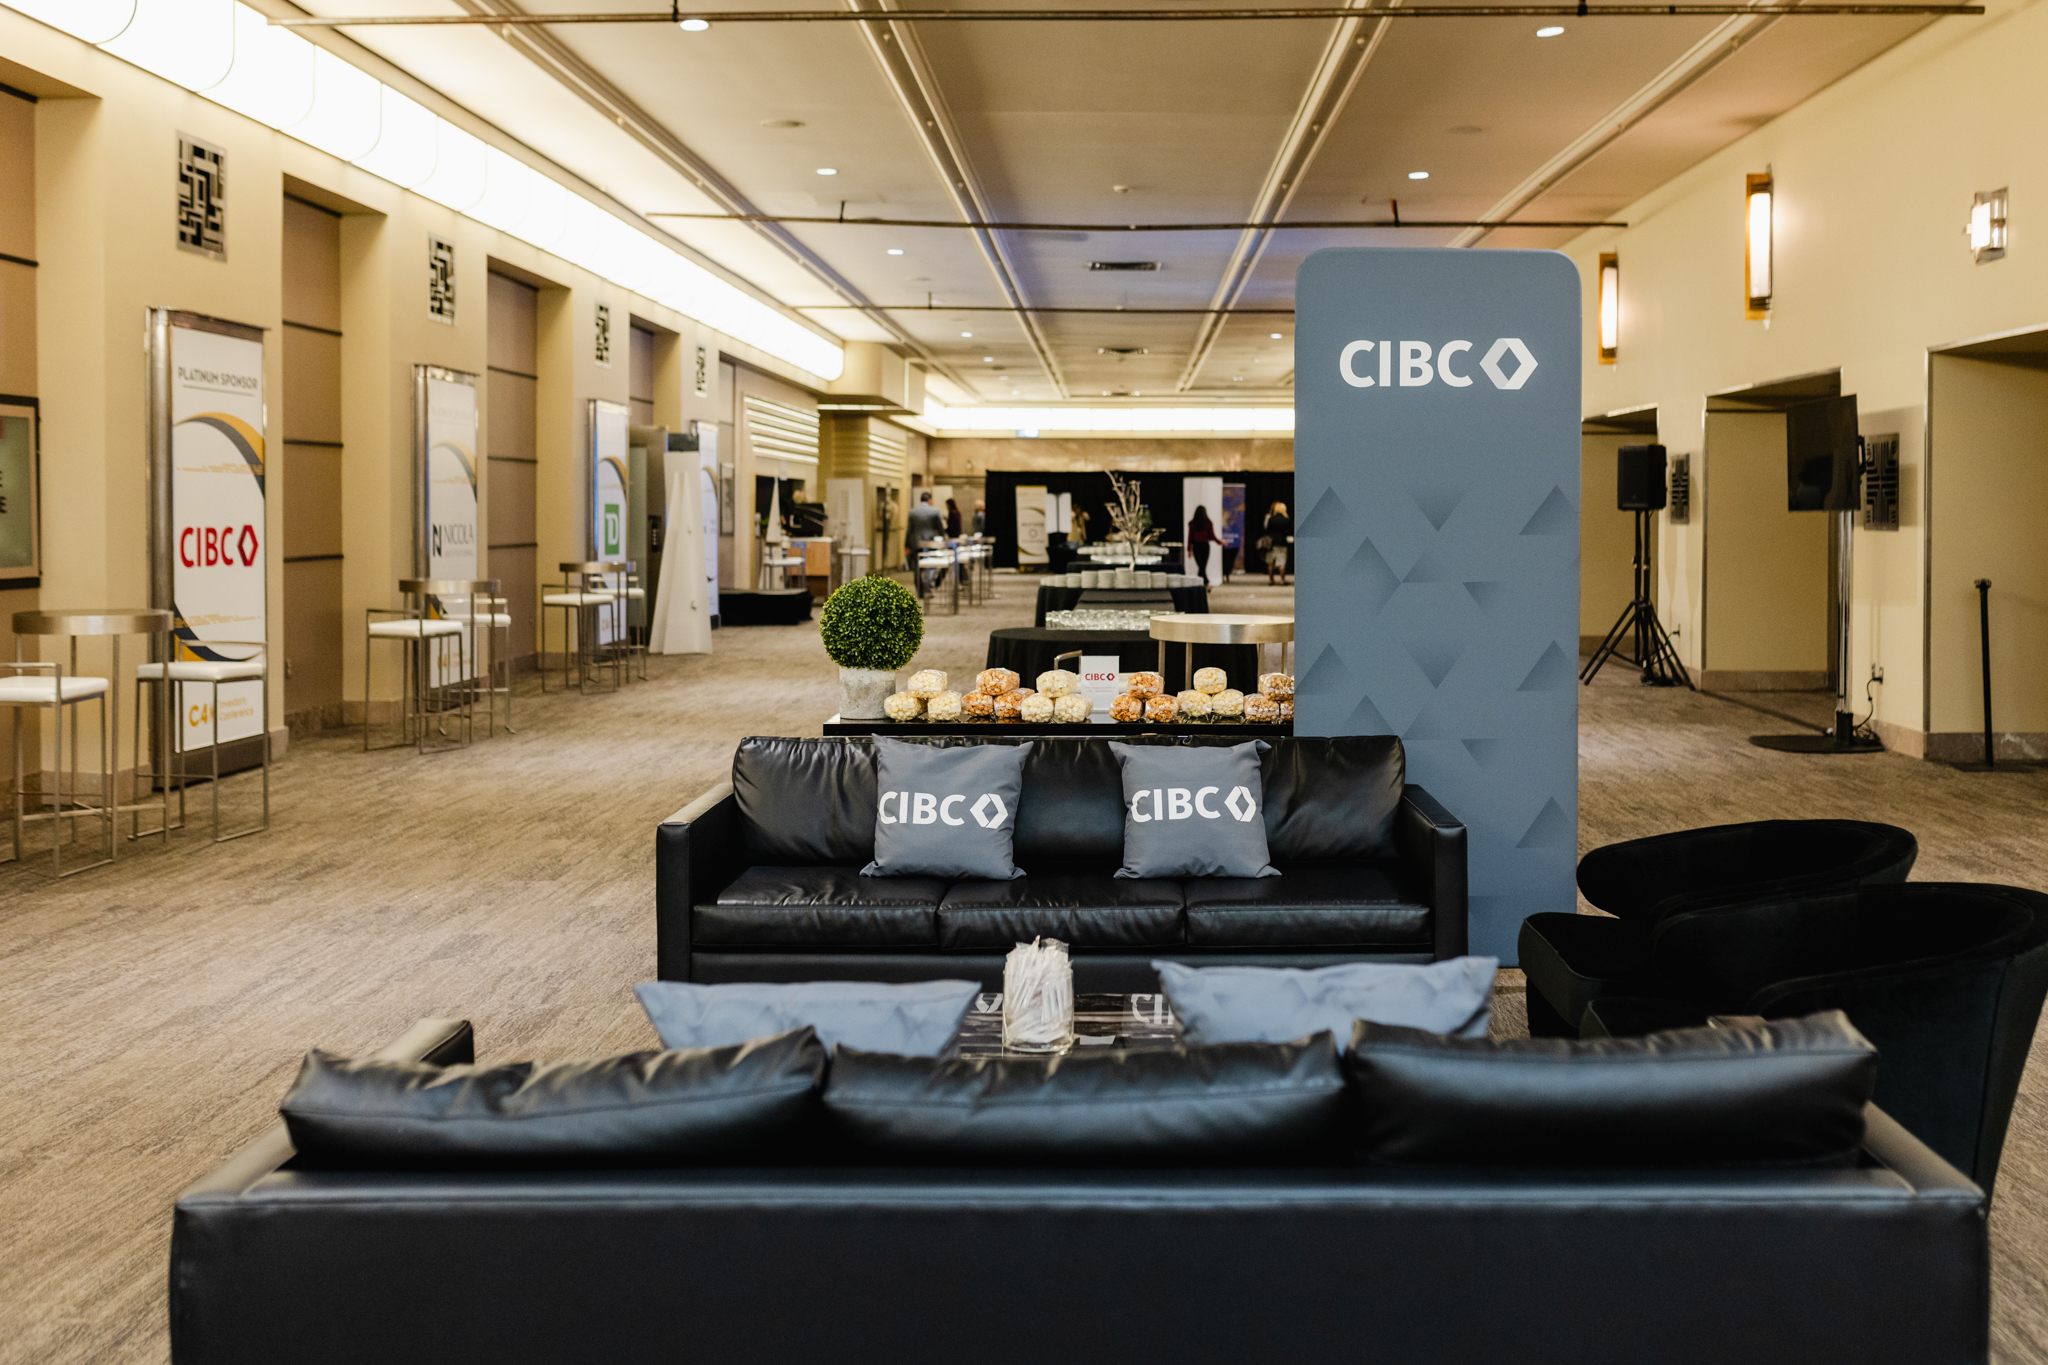 The conference room lobby features sleek black couches and modern tables, creating a sophisticated atmosphere perfect for conference photography.